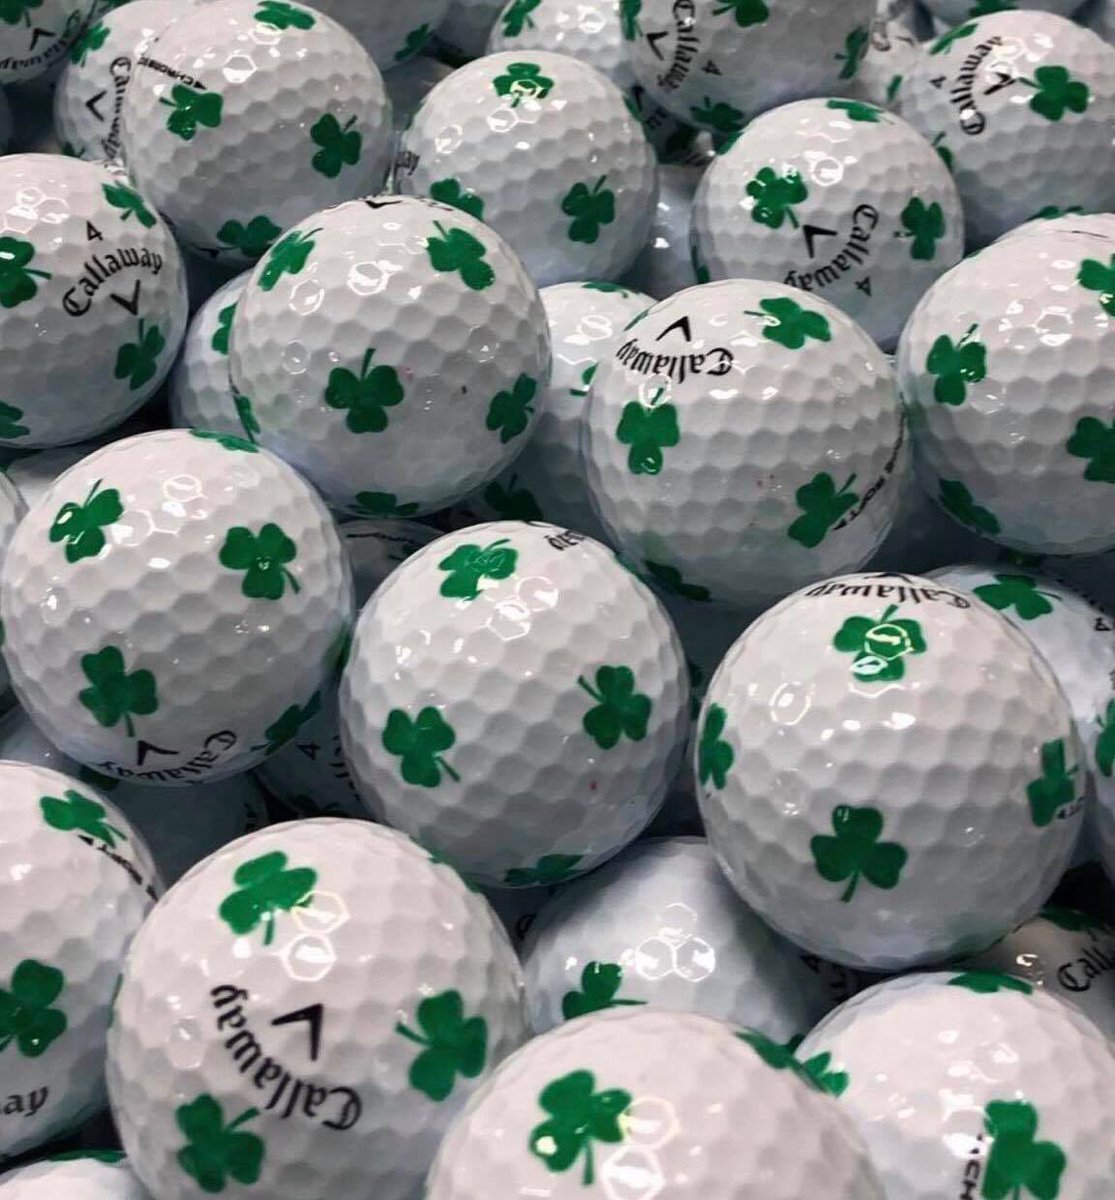 We’ve still got plenty of ☘️ Callaway Golf Balls left! Would anyone like any? TO WIN: > FOLLOW US > RT & TAG YOUR FRIENDS > COMMENT ‘YES PLEASE’ ⛳️ 👍 ☘️ ⛳️ 👍 ☘️ ⛳️ #Competition #Win #Ireland #IslandOfIreland #GolfBalls #Luxury #Golf #YesGolfing